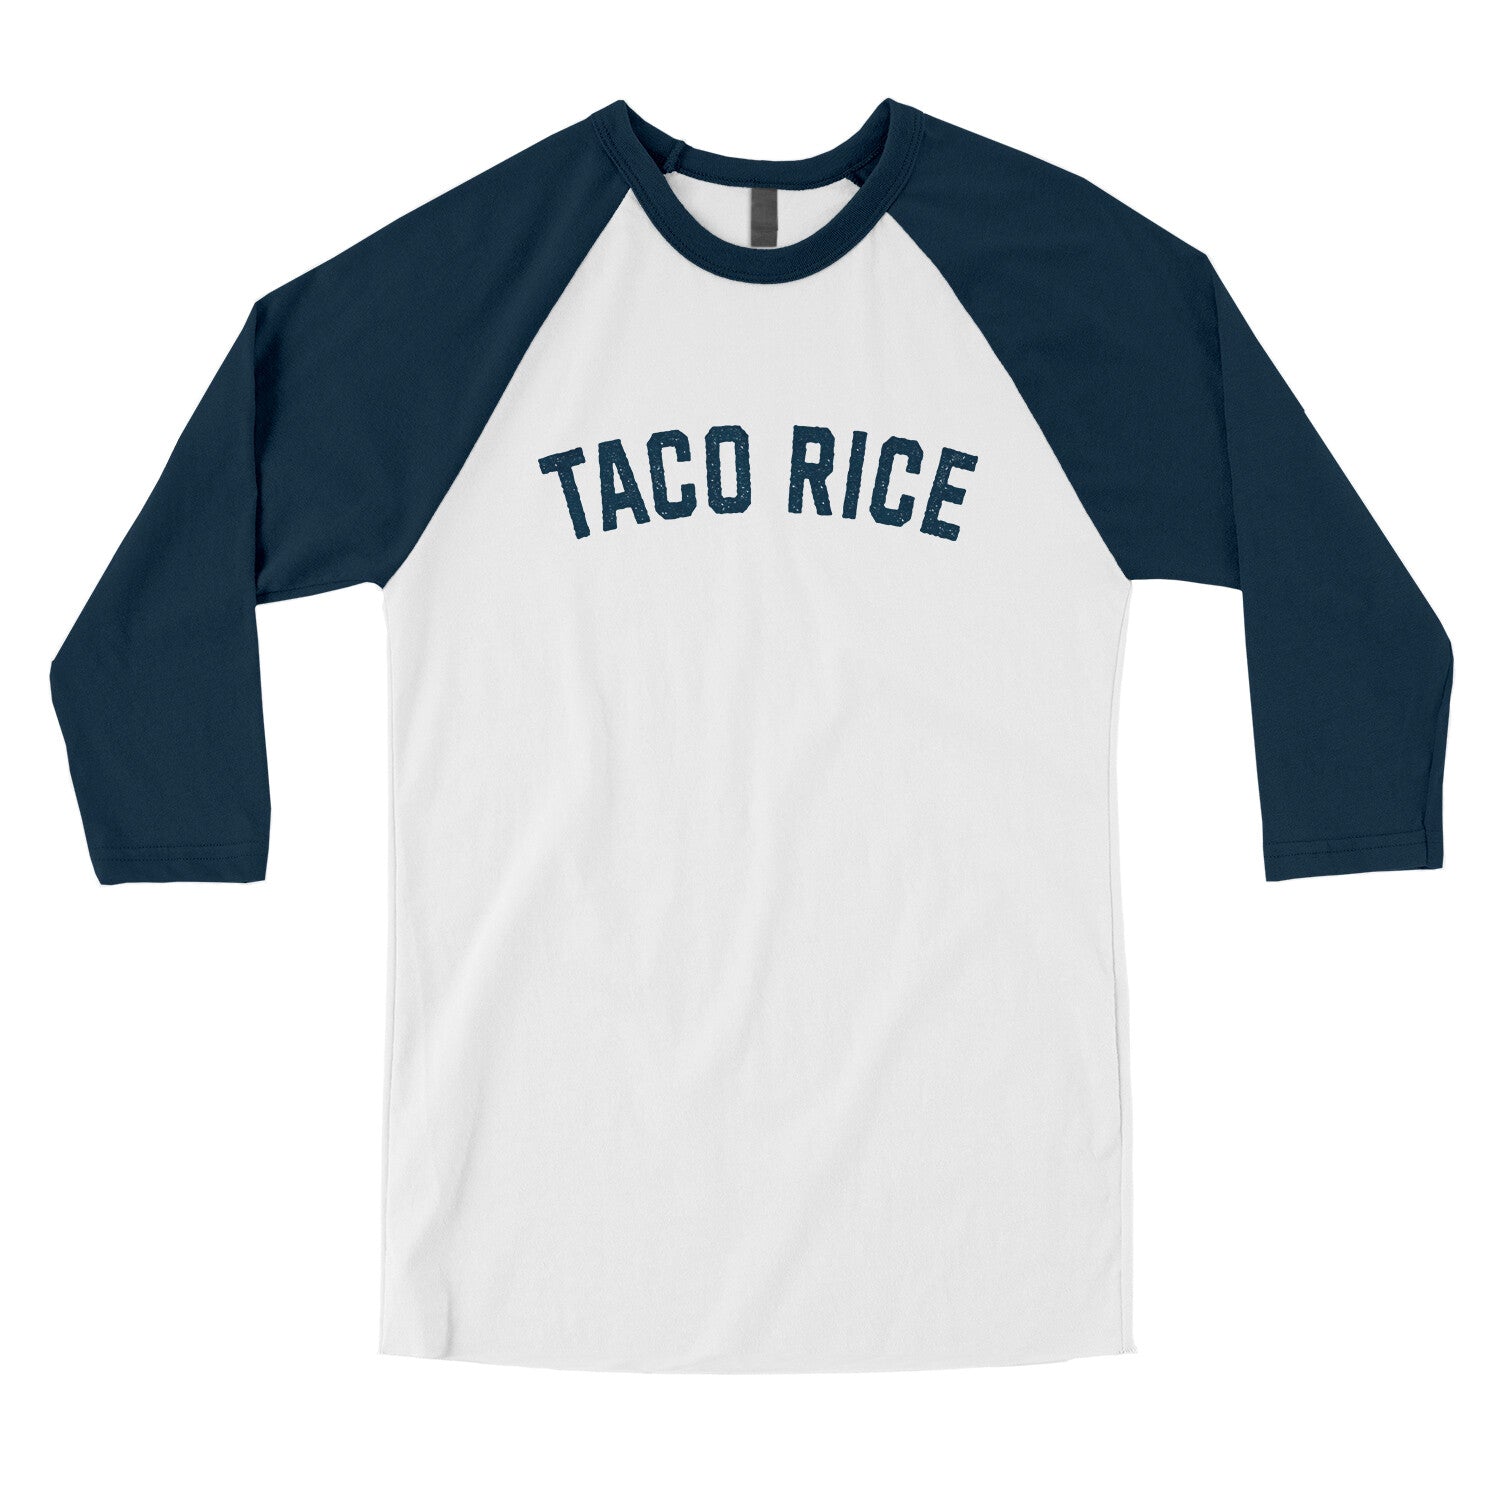 Taco Rice in White with Navy Color